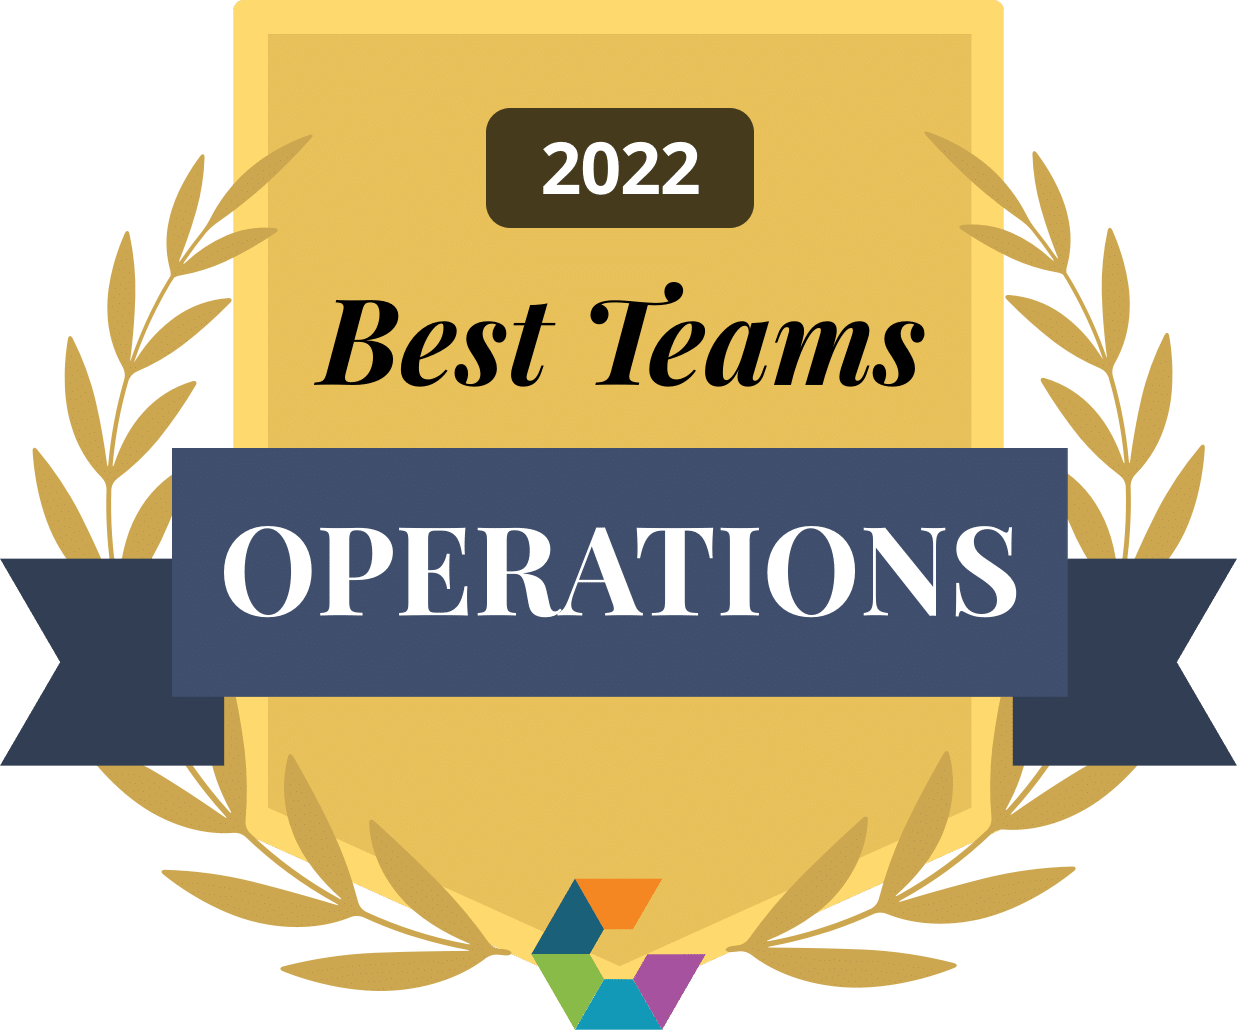 2022 Comparably Award for Best Operations Team